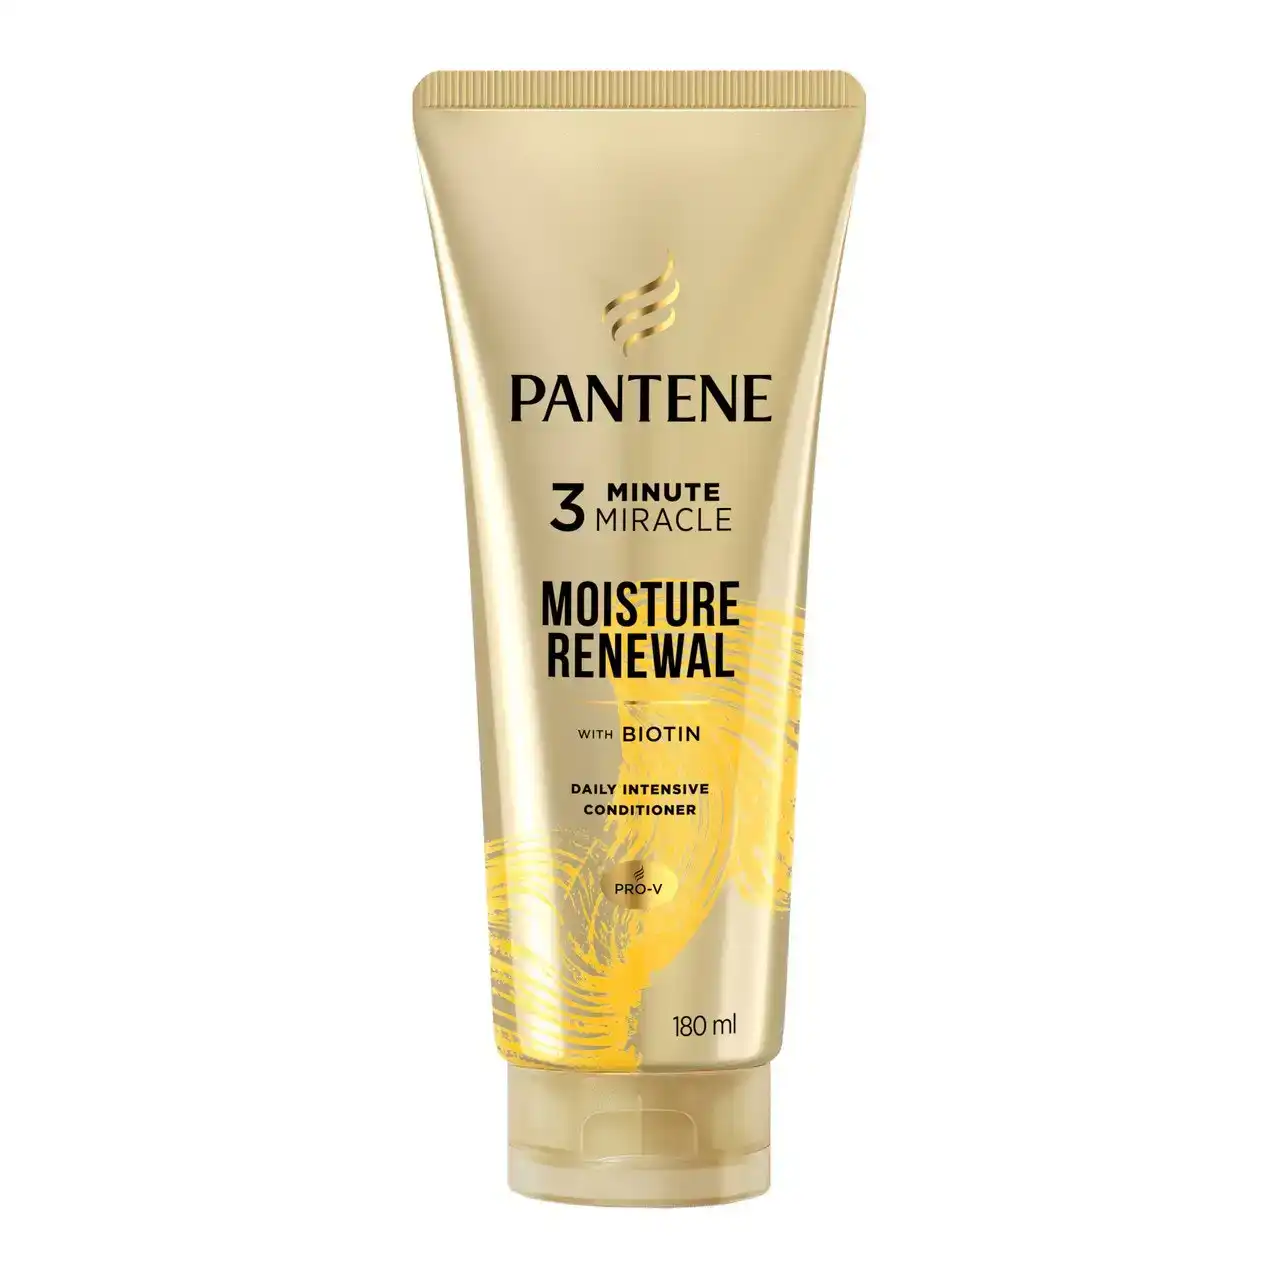 Pantene 3 Minute Miracle Daily Intensive Conditioner, Moisture Renewal with Biotin 180 ml